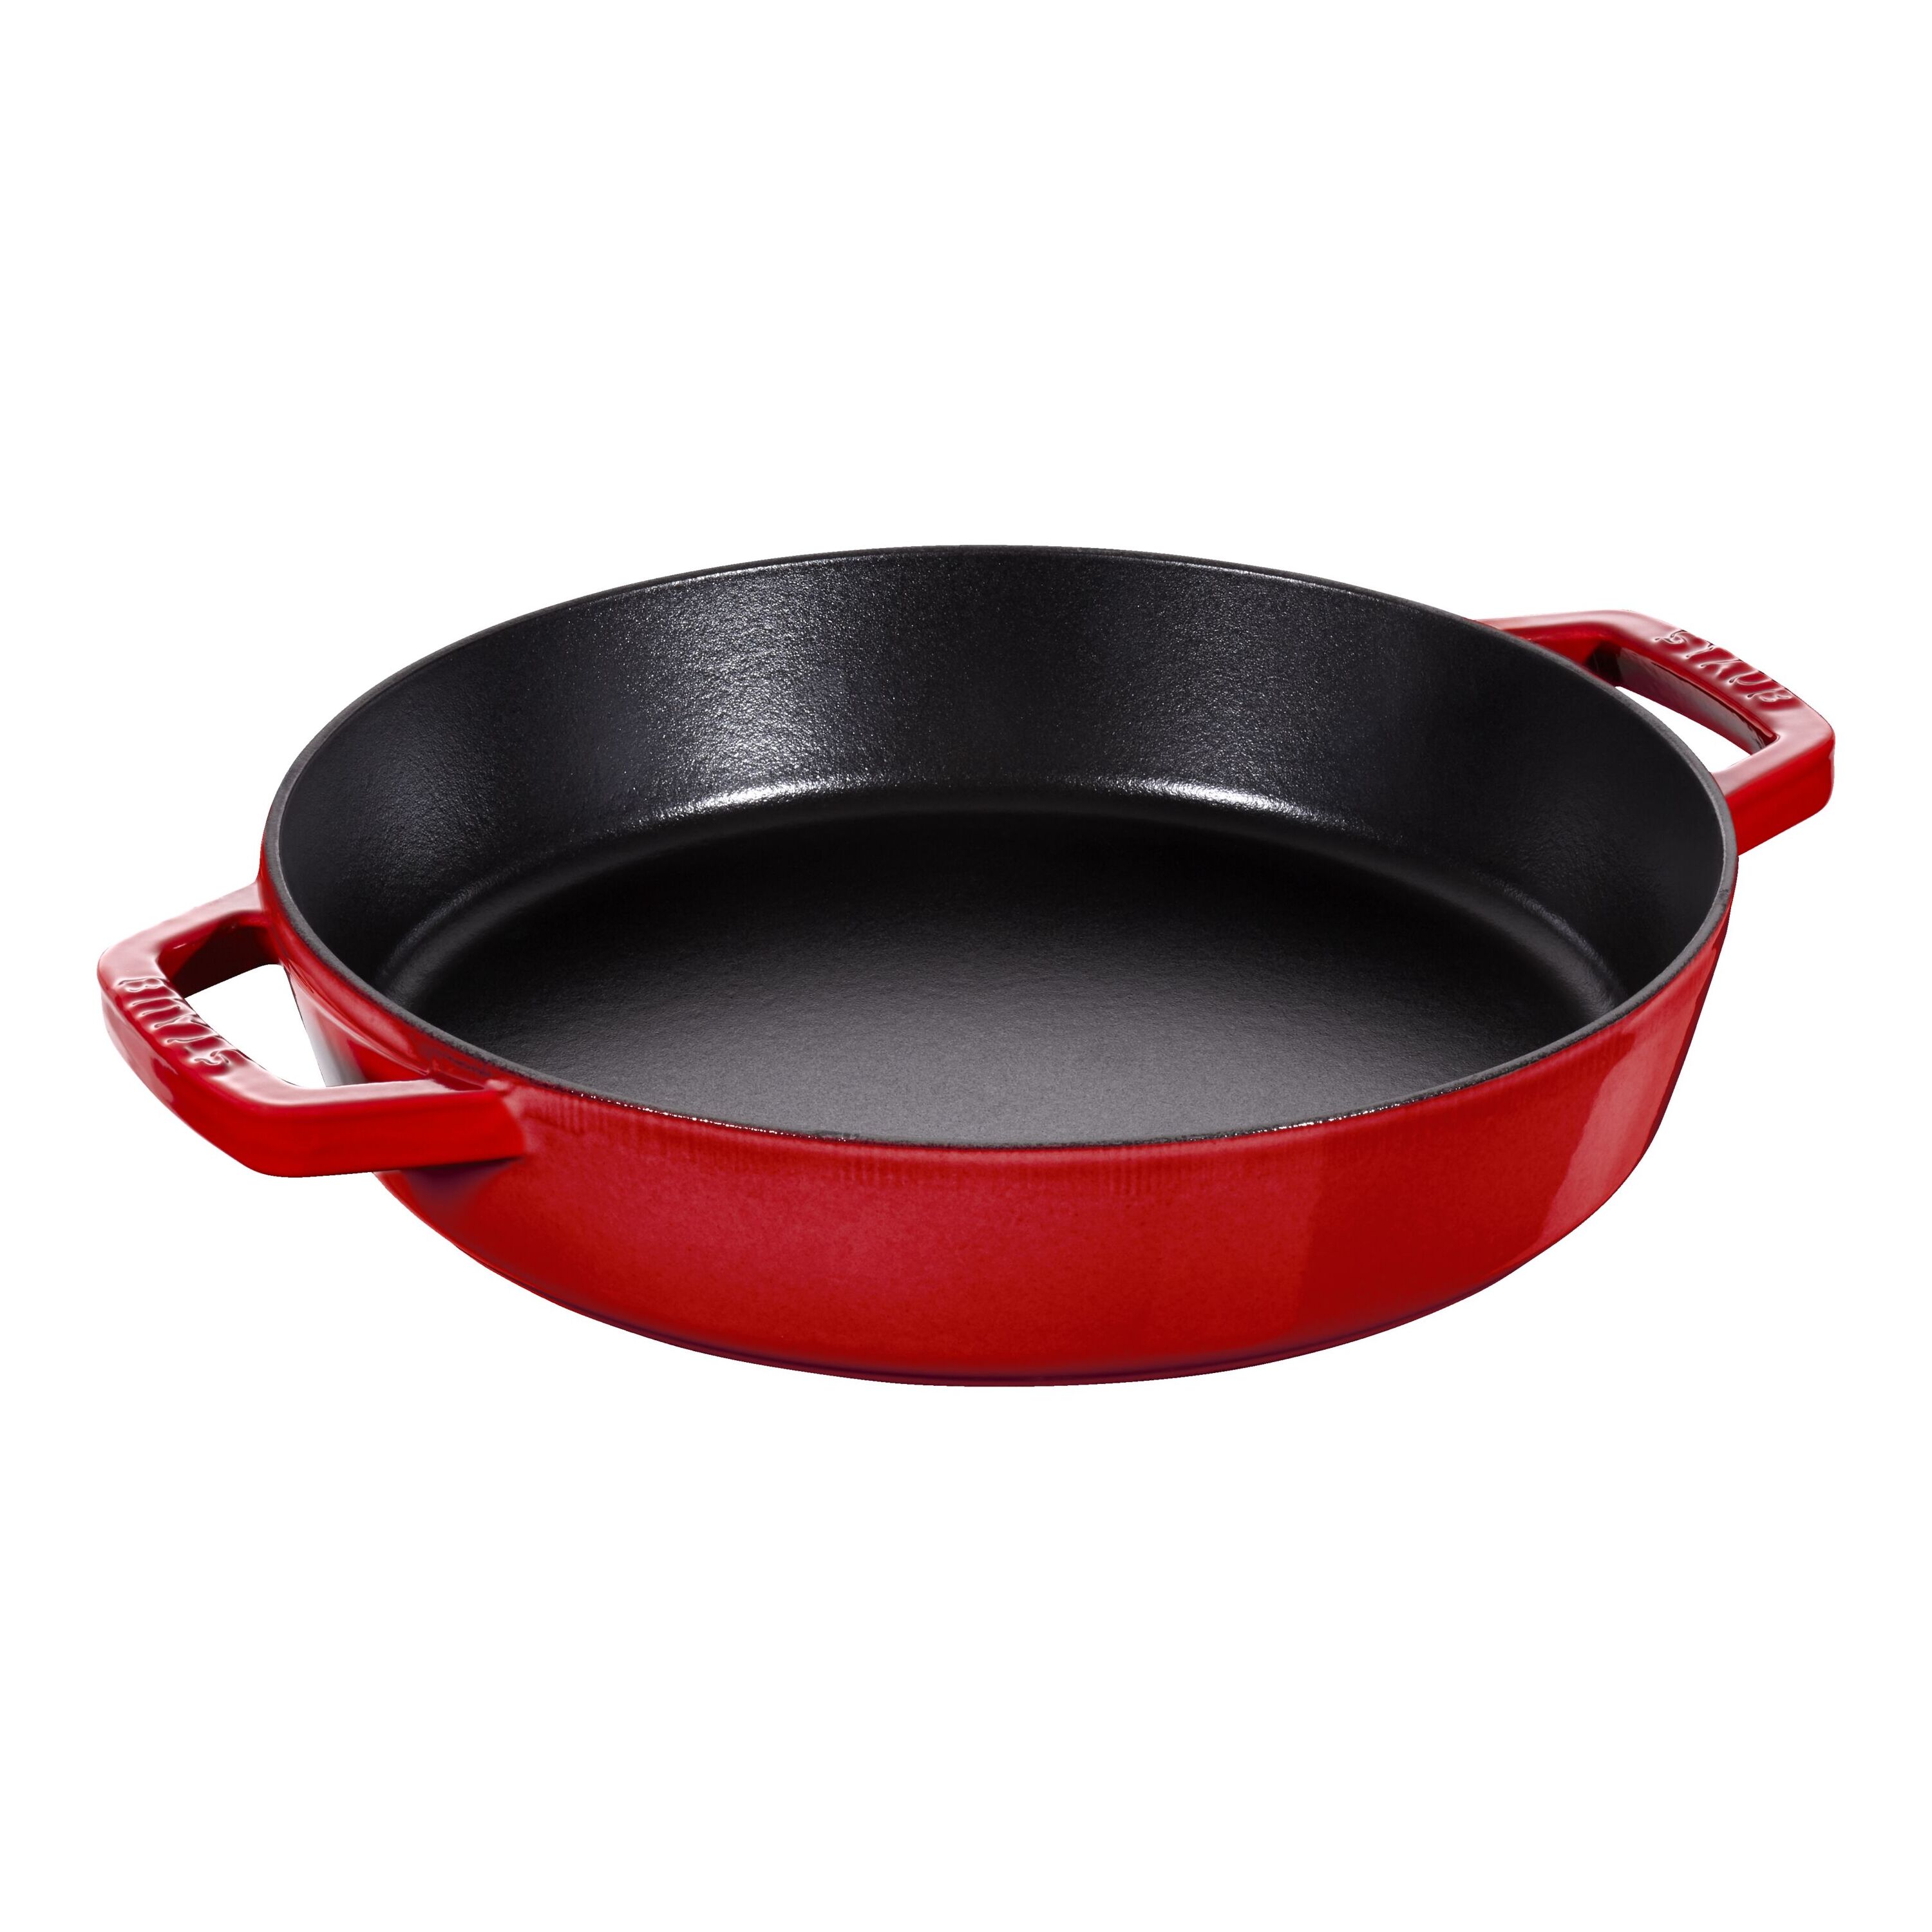 2-Piece Enamel Cast Iron Skillet Set (9 inch and 13 inch) Frying Pan Set,  Ideal for both Indoor & Outdoor use, Oven Safe, for all kinds of meat